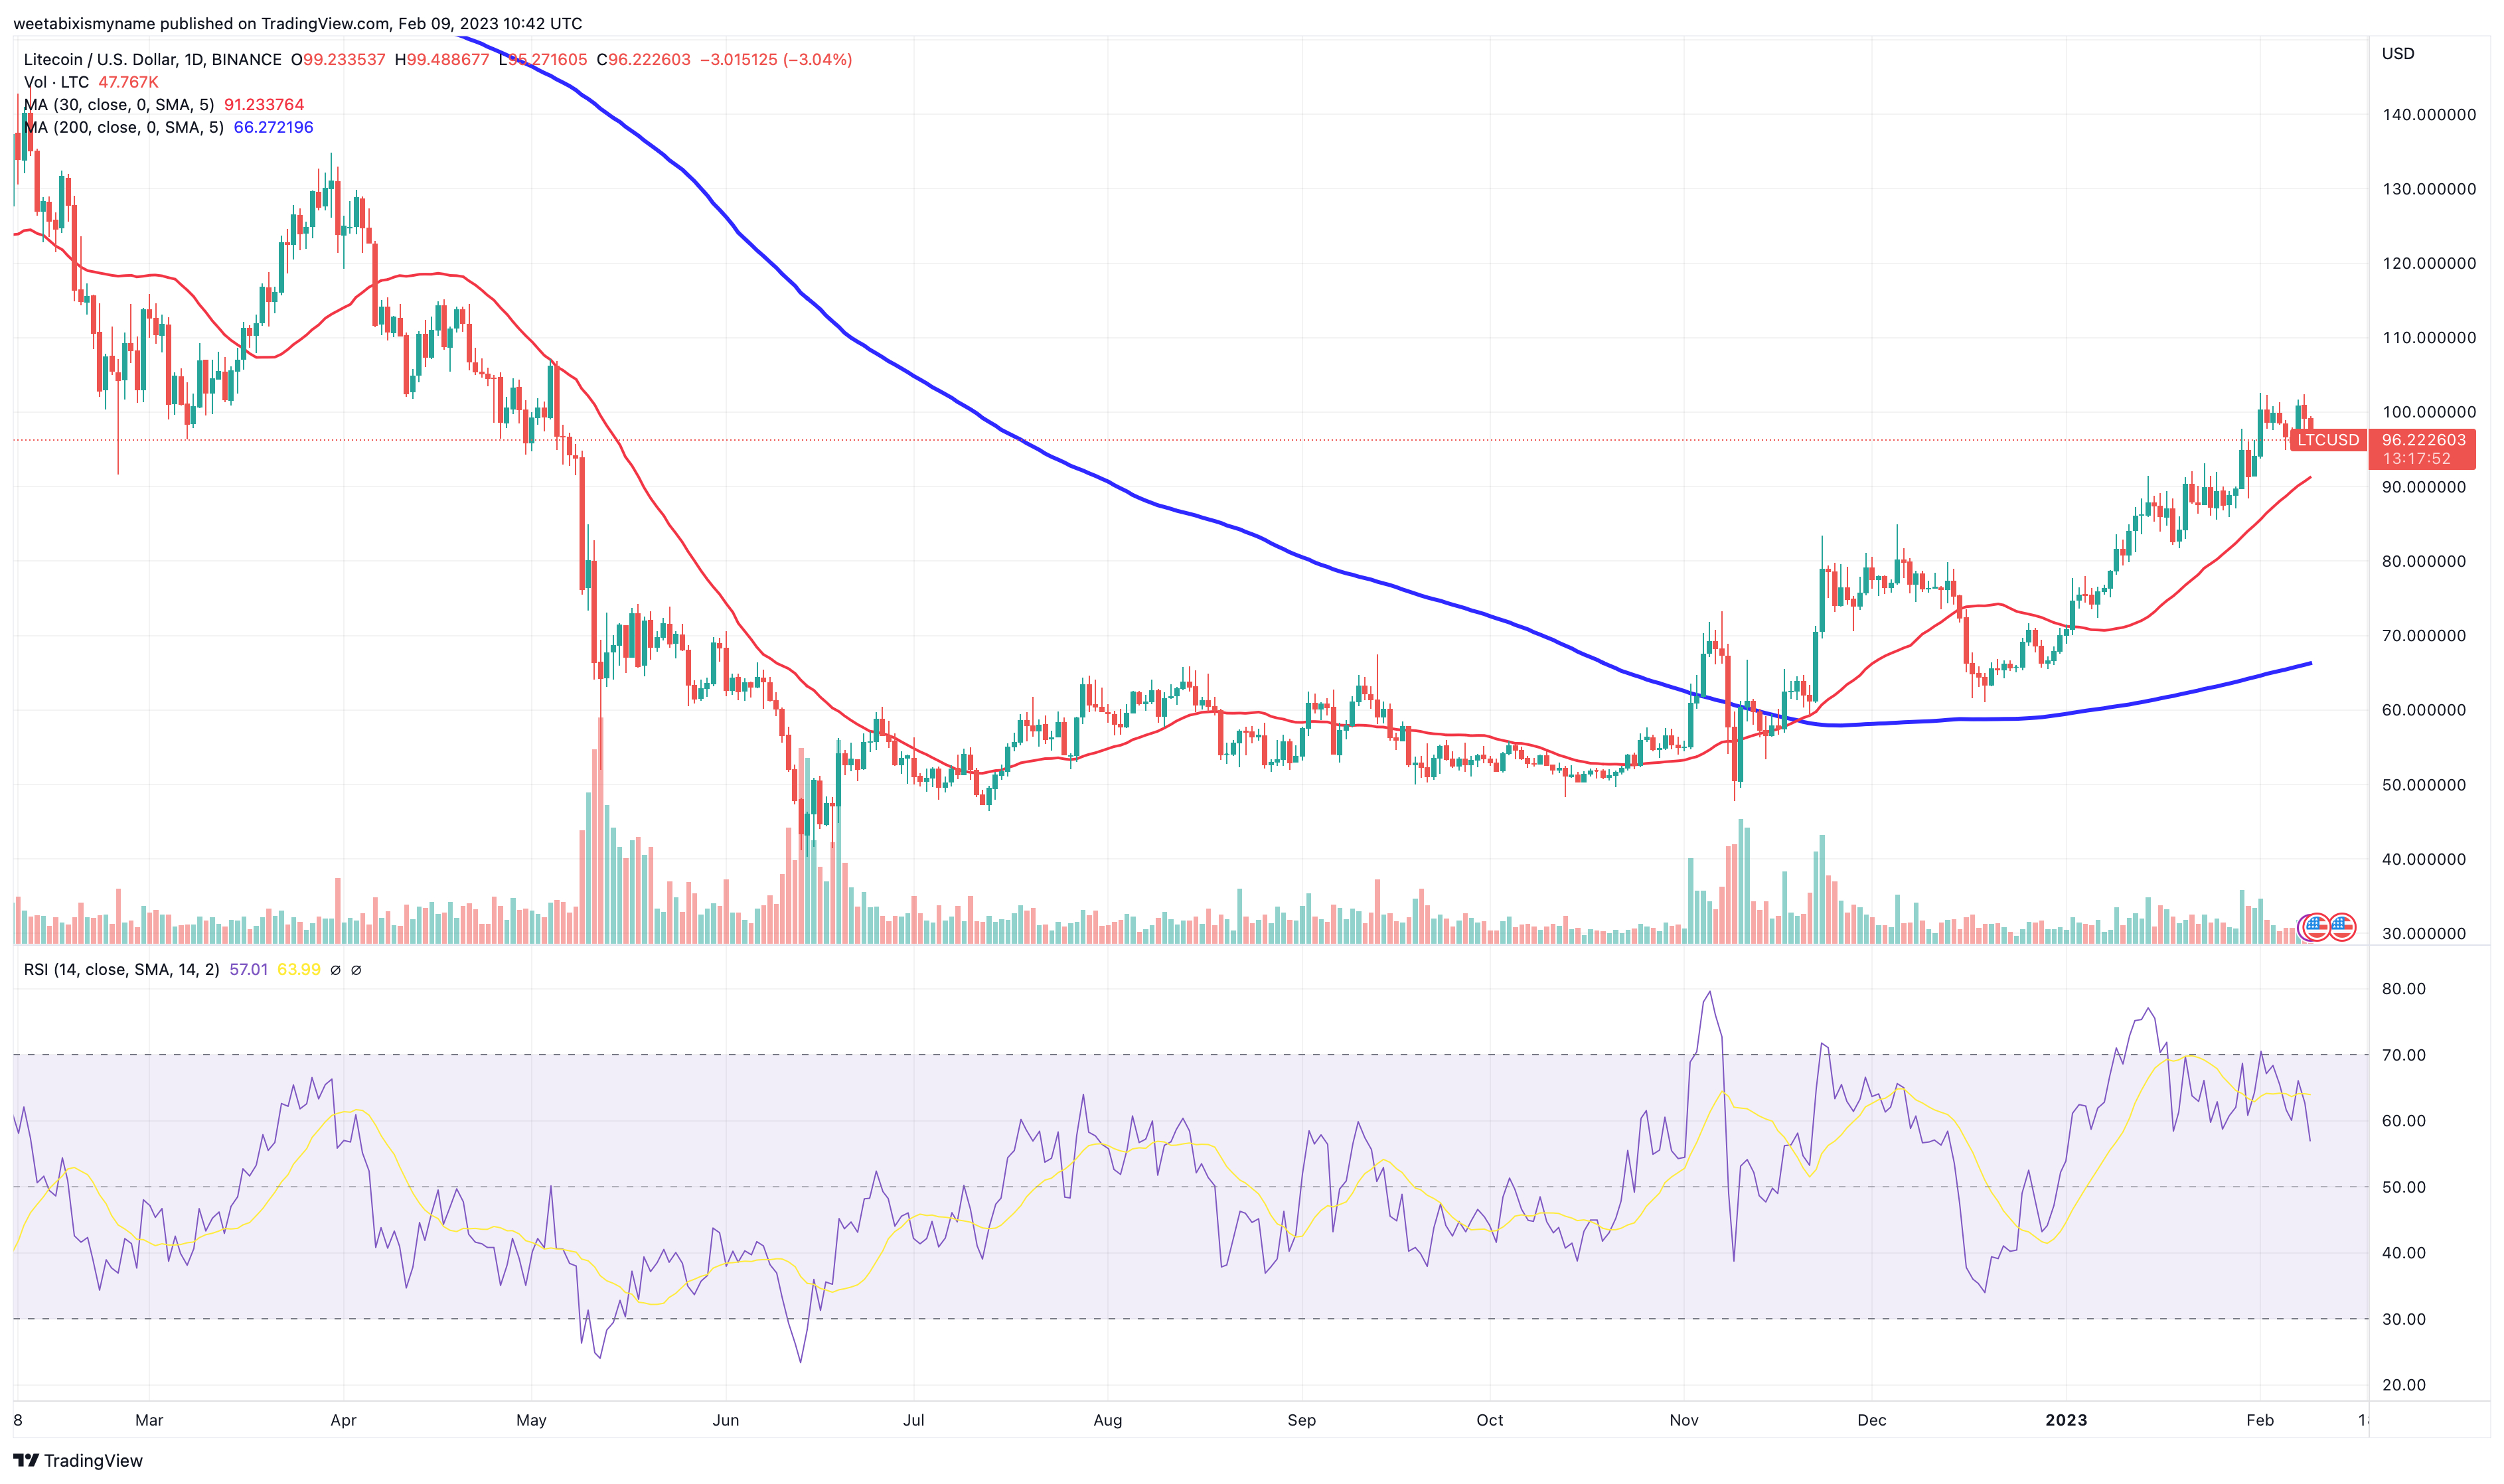 Is Litecoin Expected To Reach $ Or More In The Next 5 years? | Trading Education